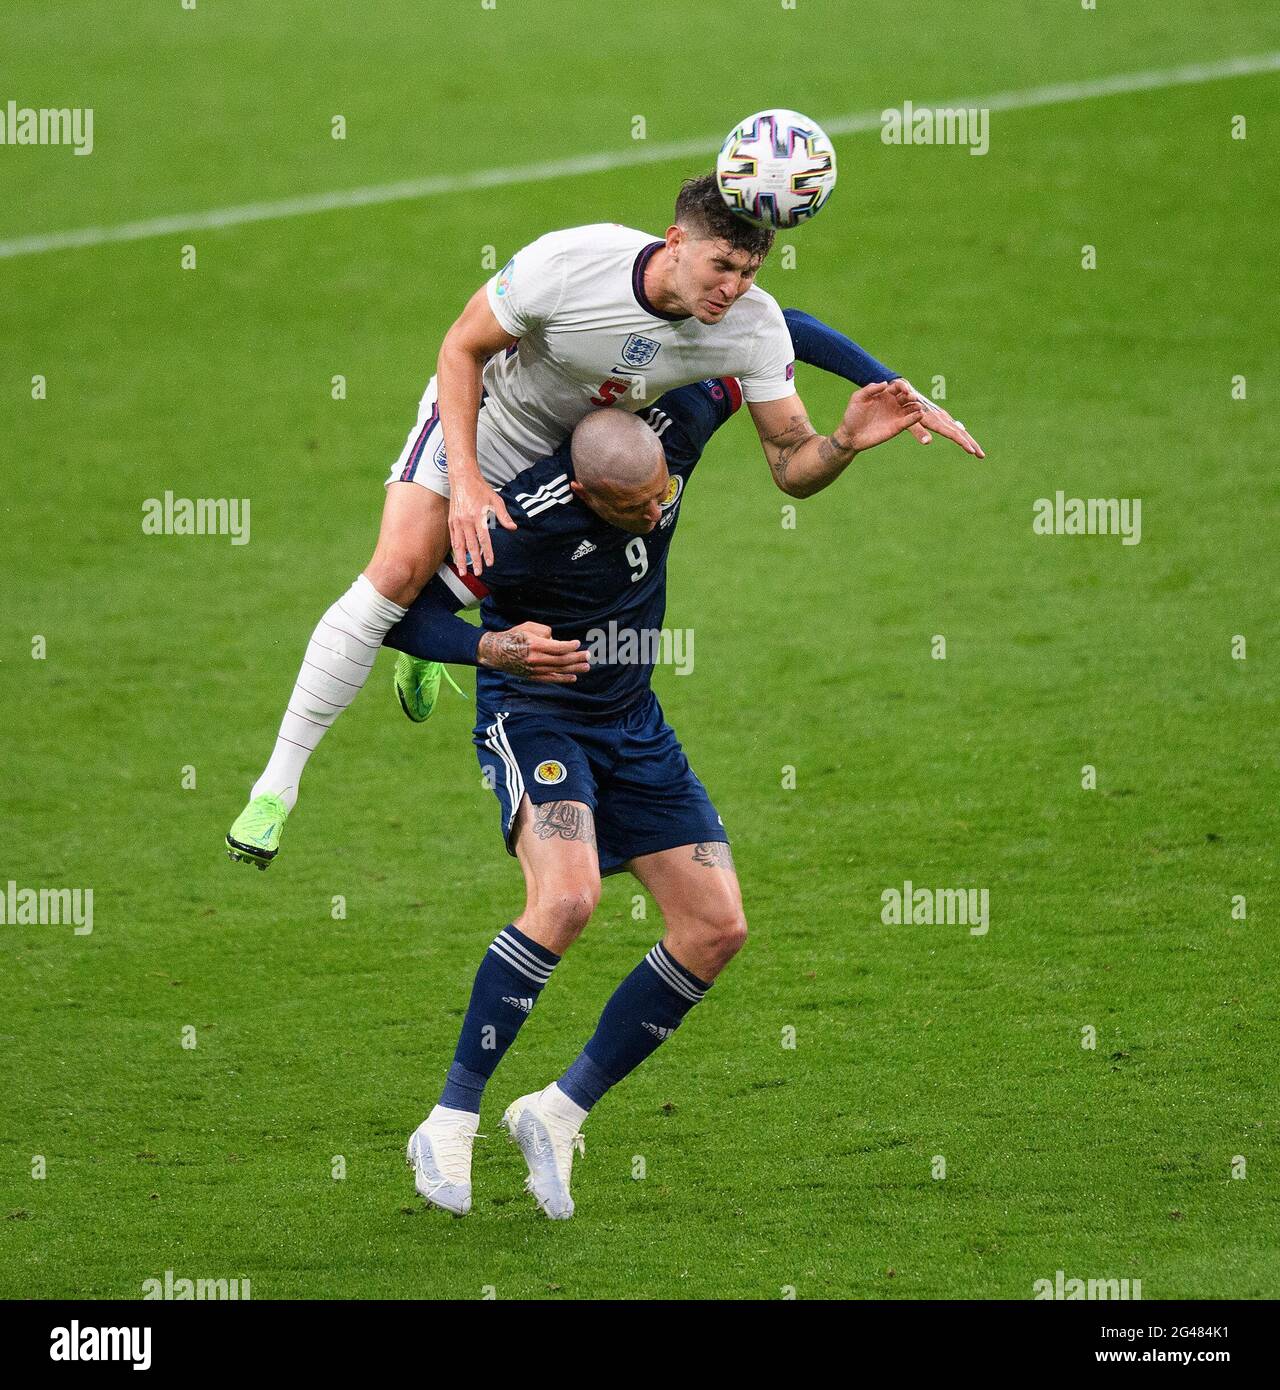 18th June 2021 - England v Scotland - UEFA Euro 2020 Group D Match - Wembley - London  John Stones in an aerial battle with Lyndon Dykes during England's match against Scotland in the UEFA European Championships 2020 Picture Credit : © Mark Pain / Alamy Live News Stock Photo